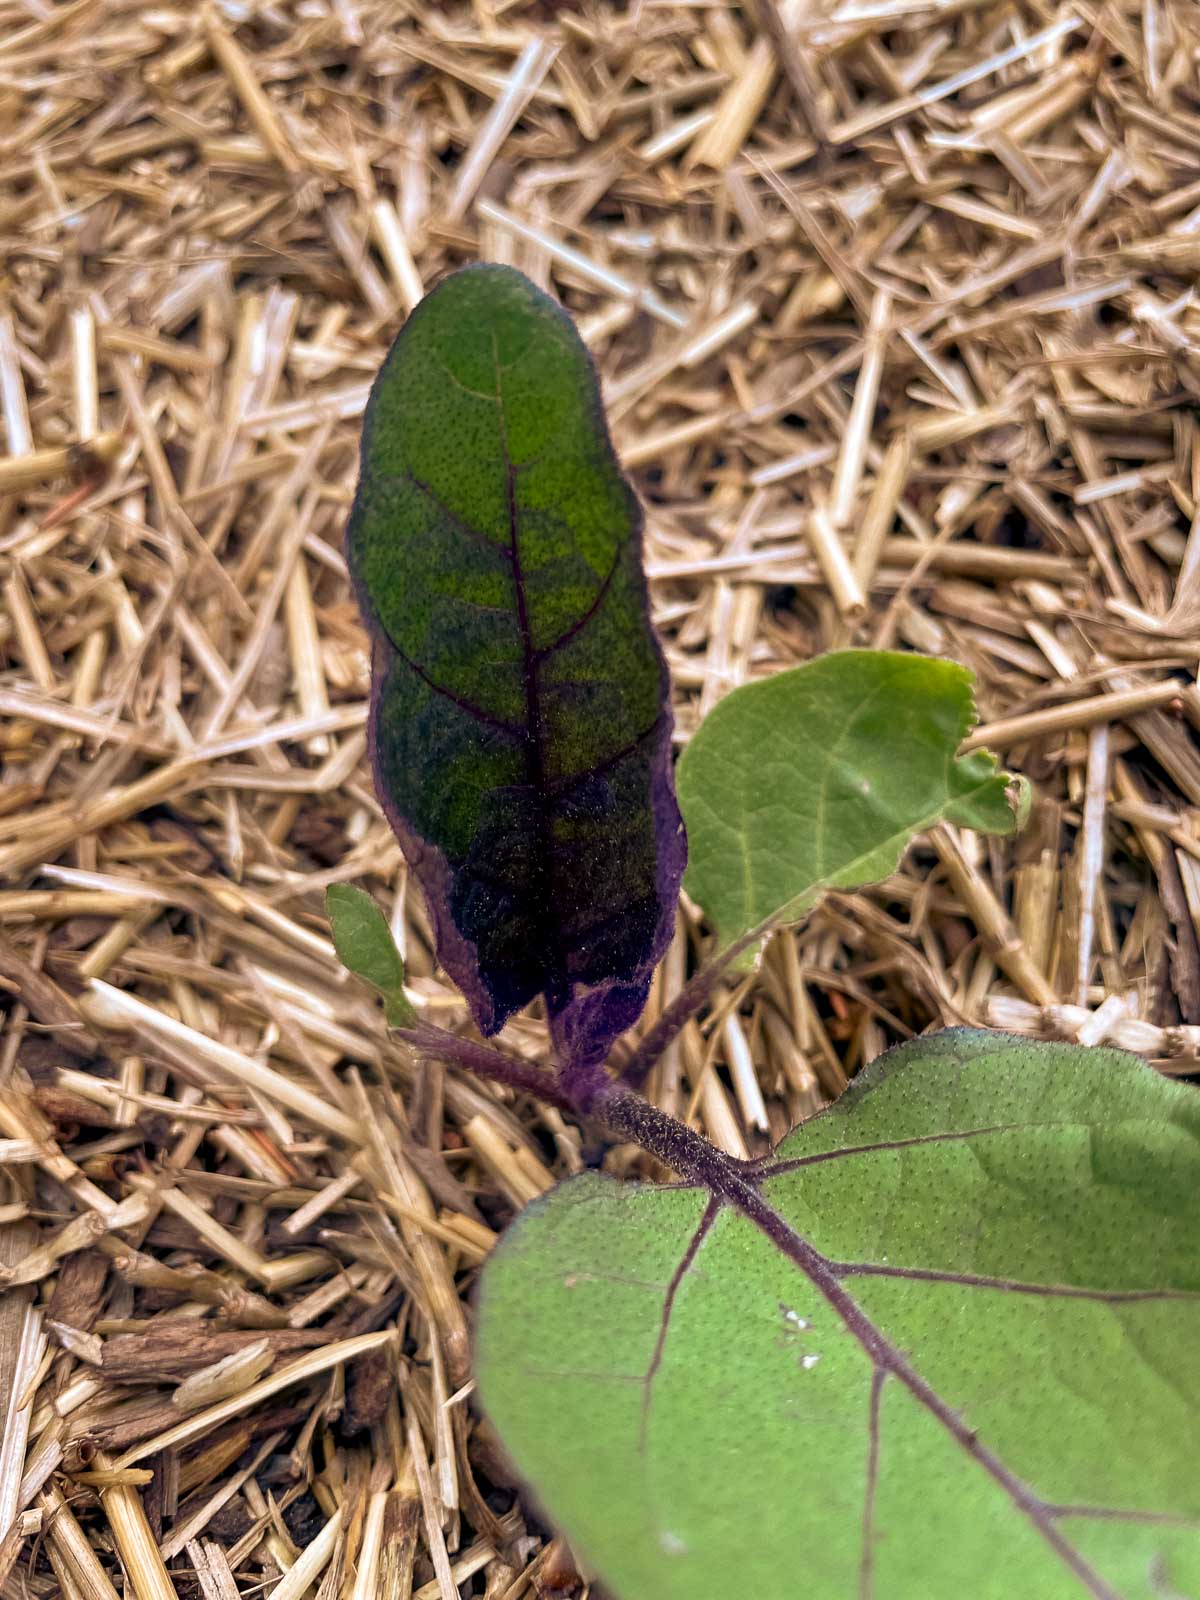 An eggplant seedling with three green and purple leaves growing in a raised bed heavily mulched with straw.